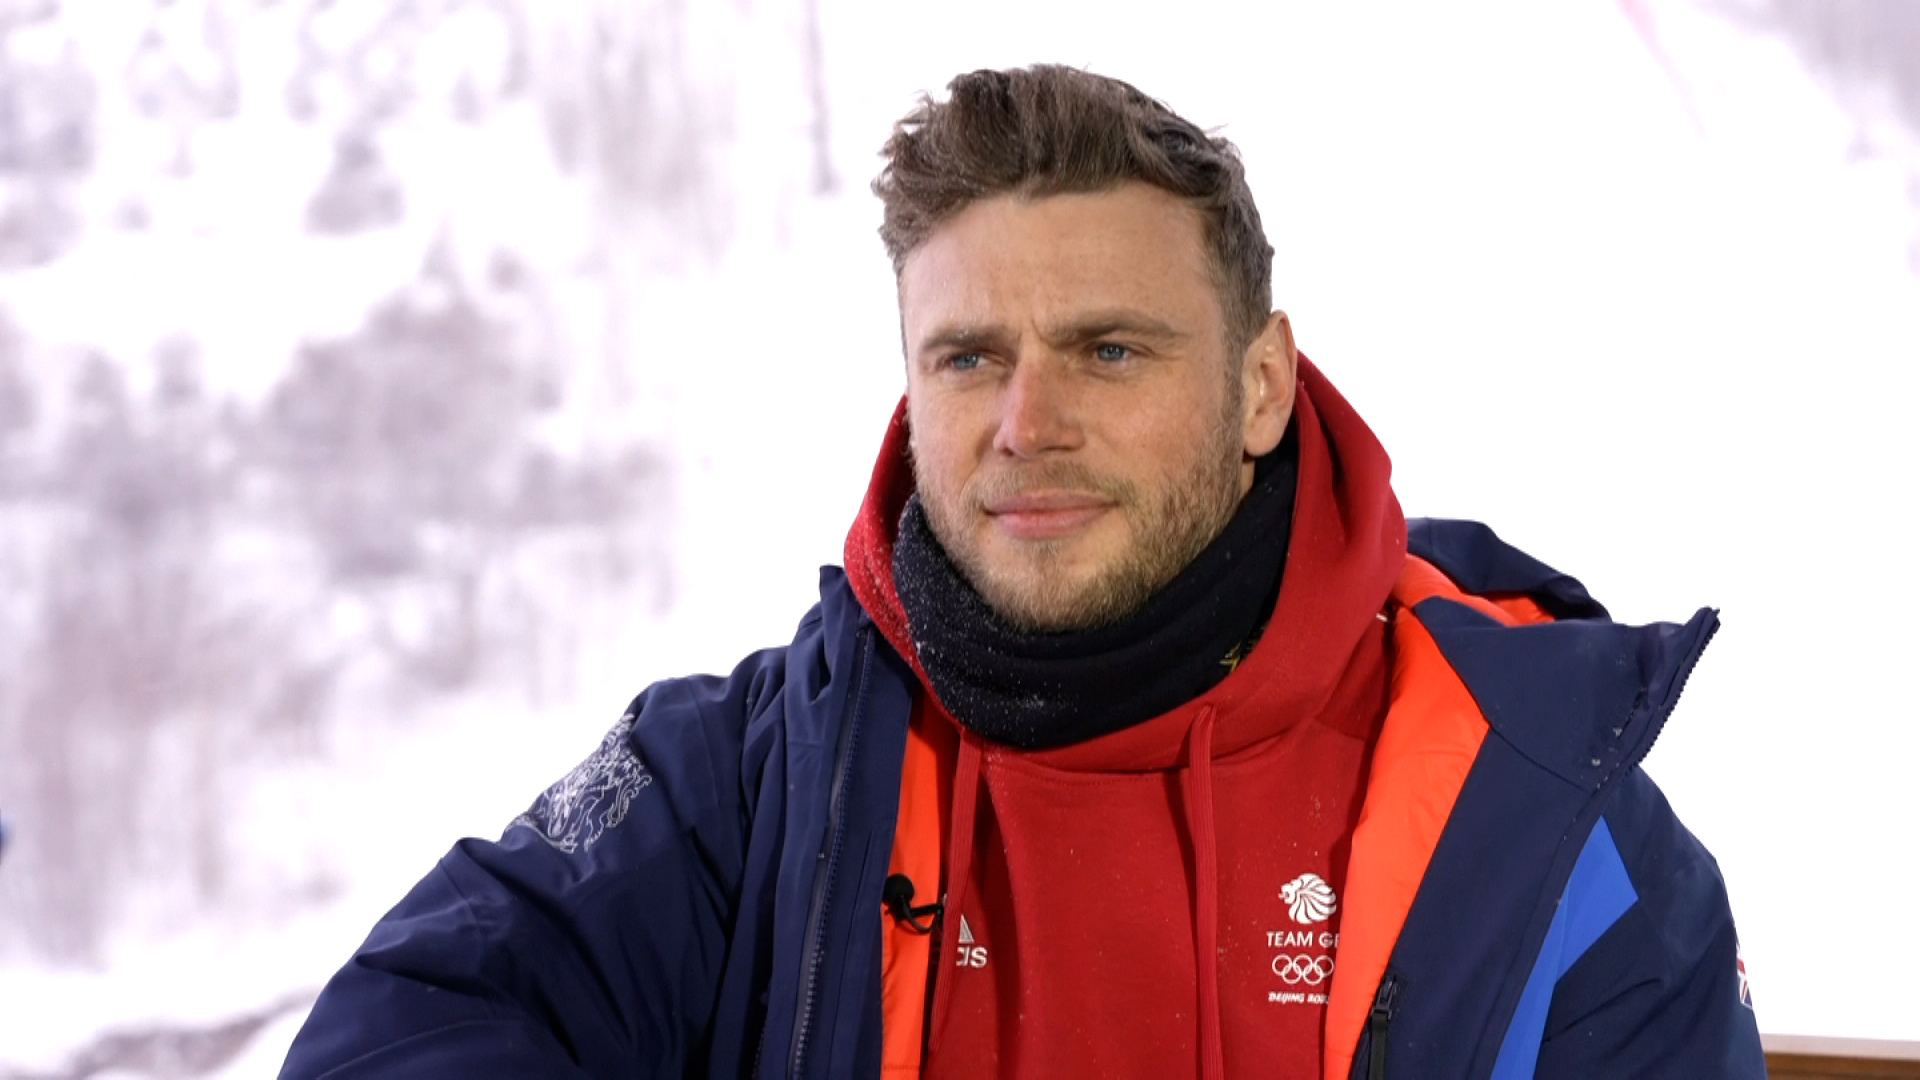 Gus Kenworthy during his interview with CNN.